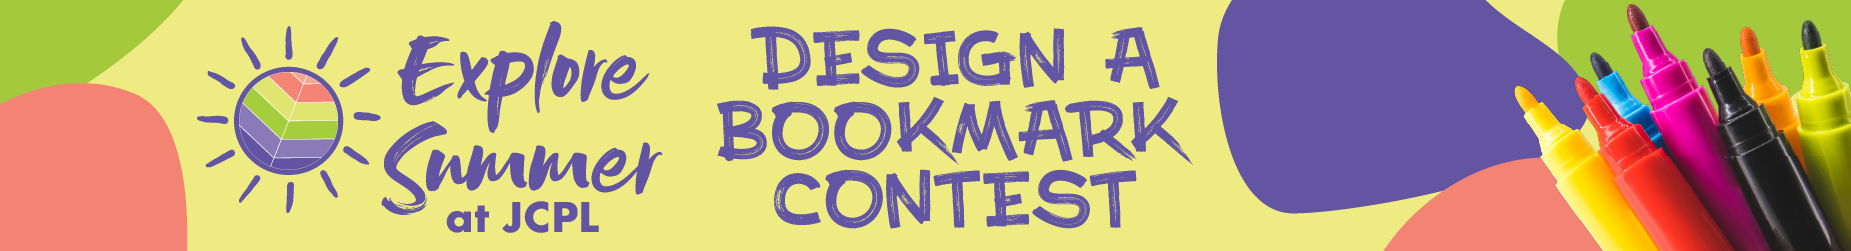 Design a Bookmark Contest, Entries accepted June 1-30 next to collection of colorful markers